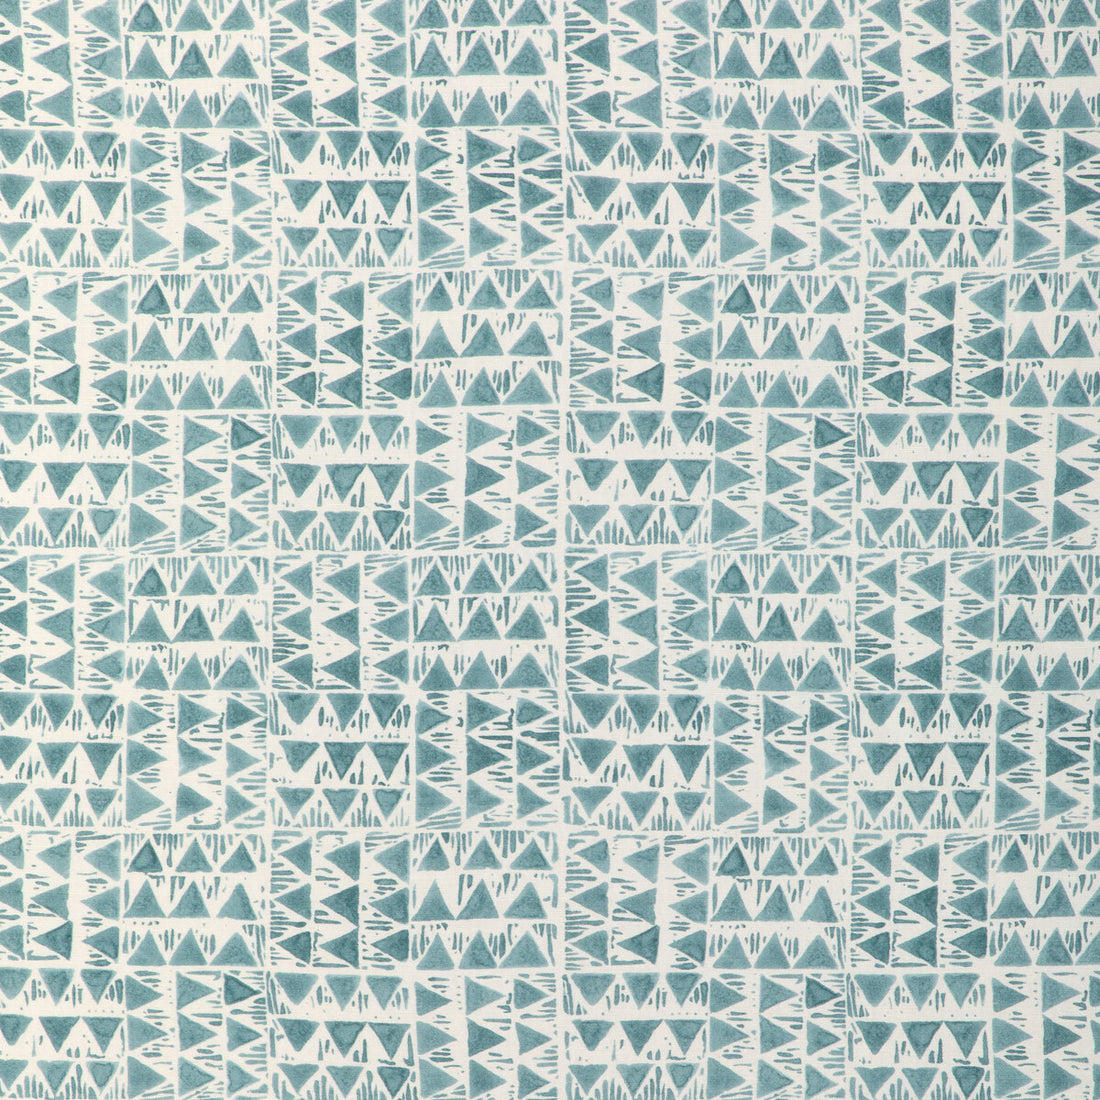 Yampa Print fabric in mist color - pattern 2020210.13.0 - by Lee Jofa in the Clare Prints collection